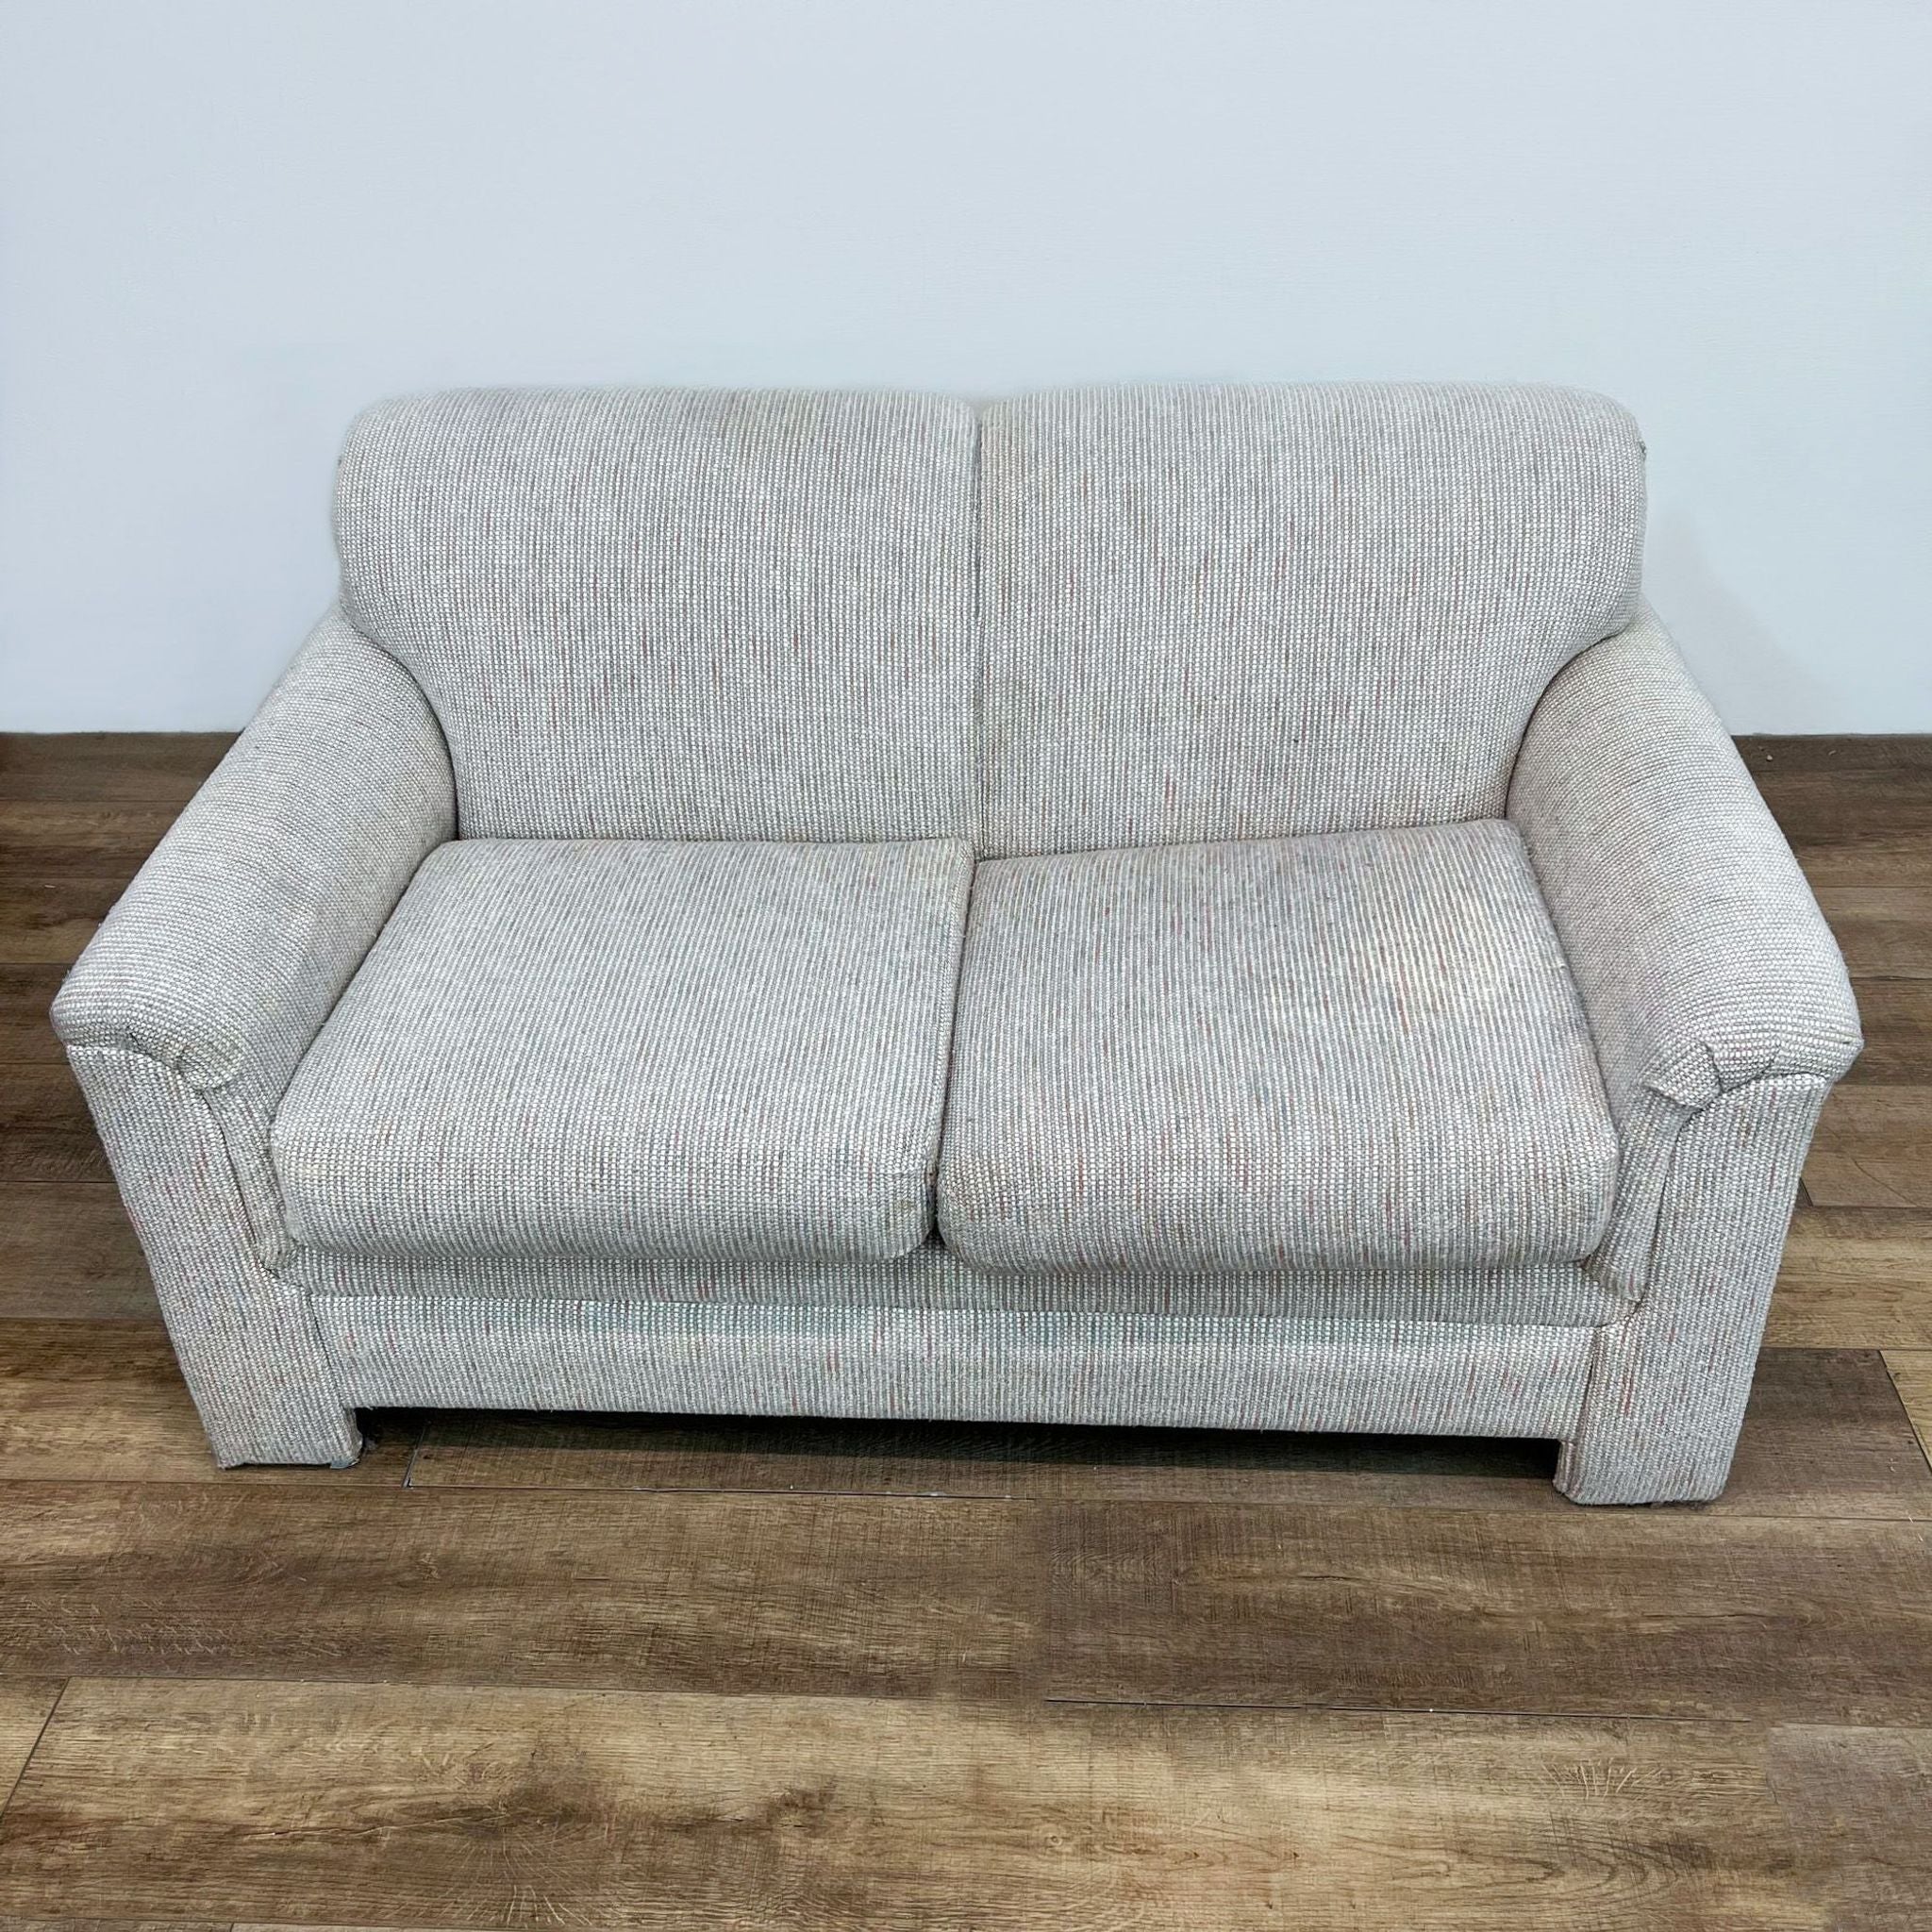 2. Front view of a Reperch tweed pattern fabric loveseat with cushioned backs and arms on a wooden floor.